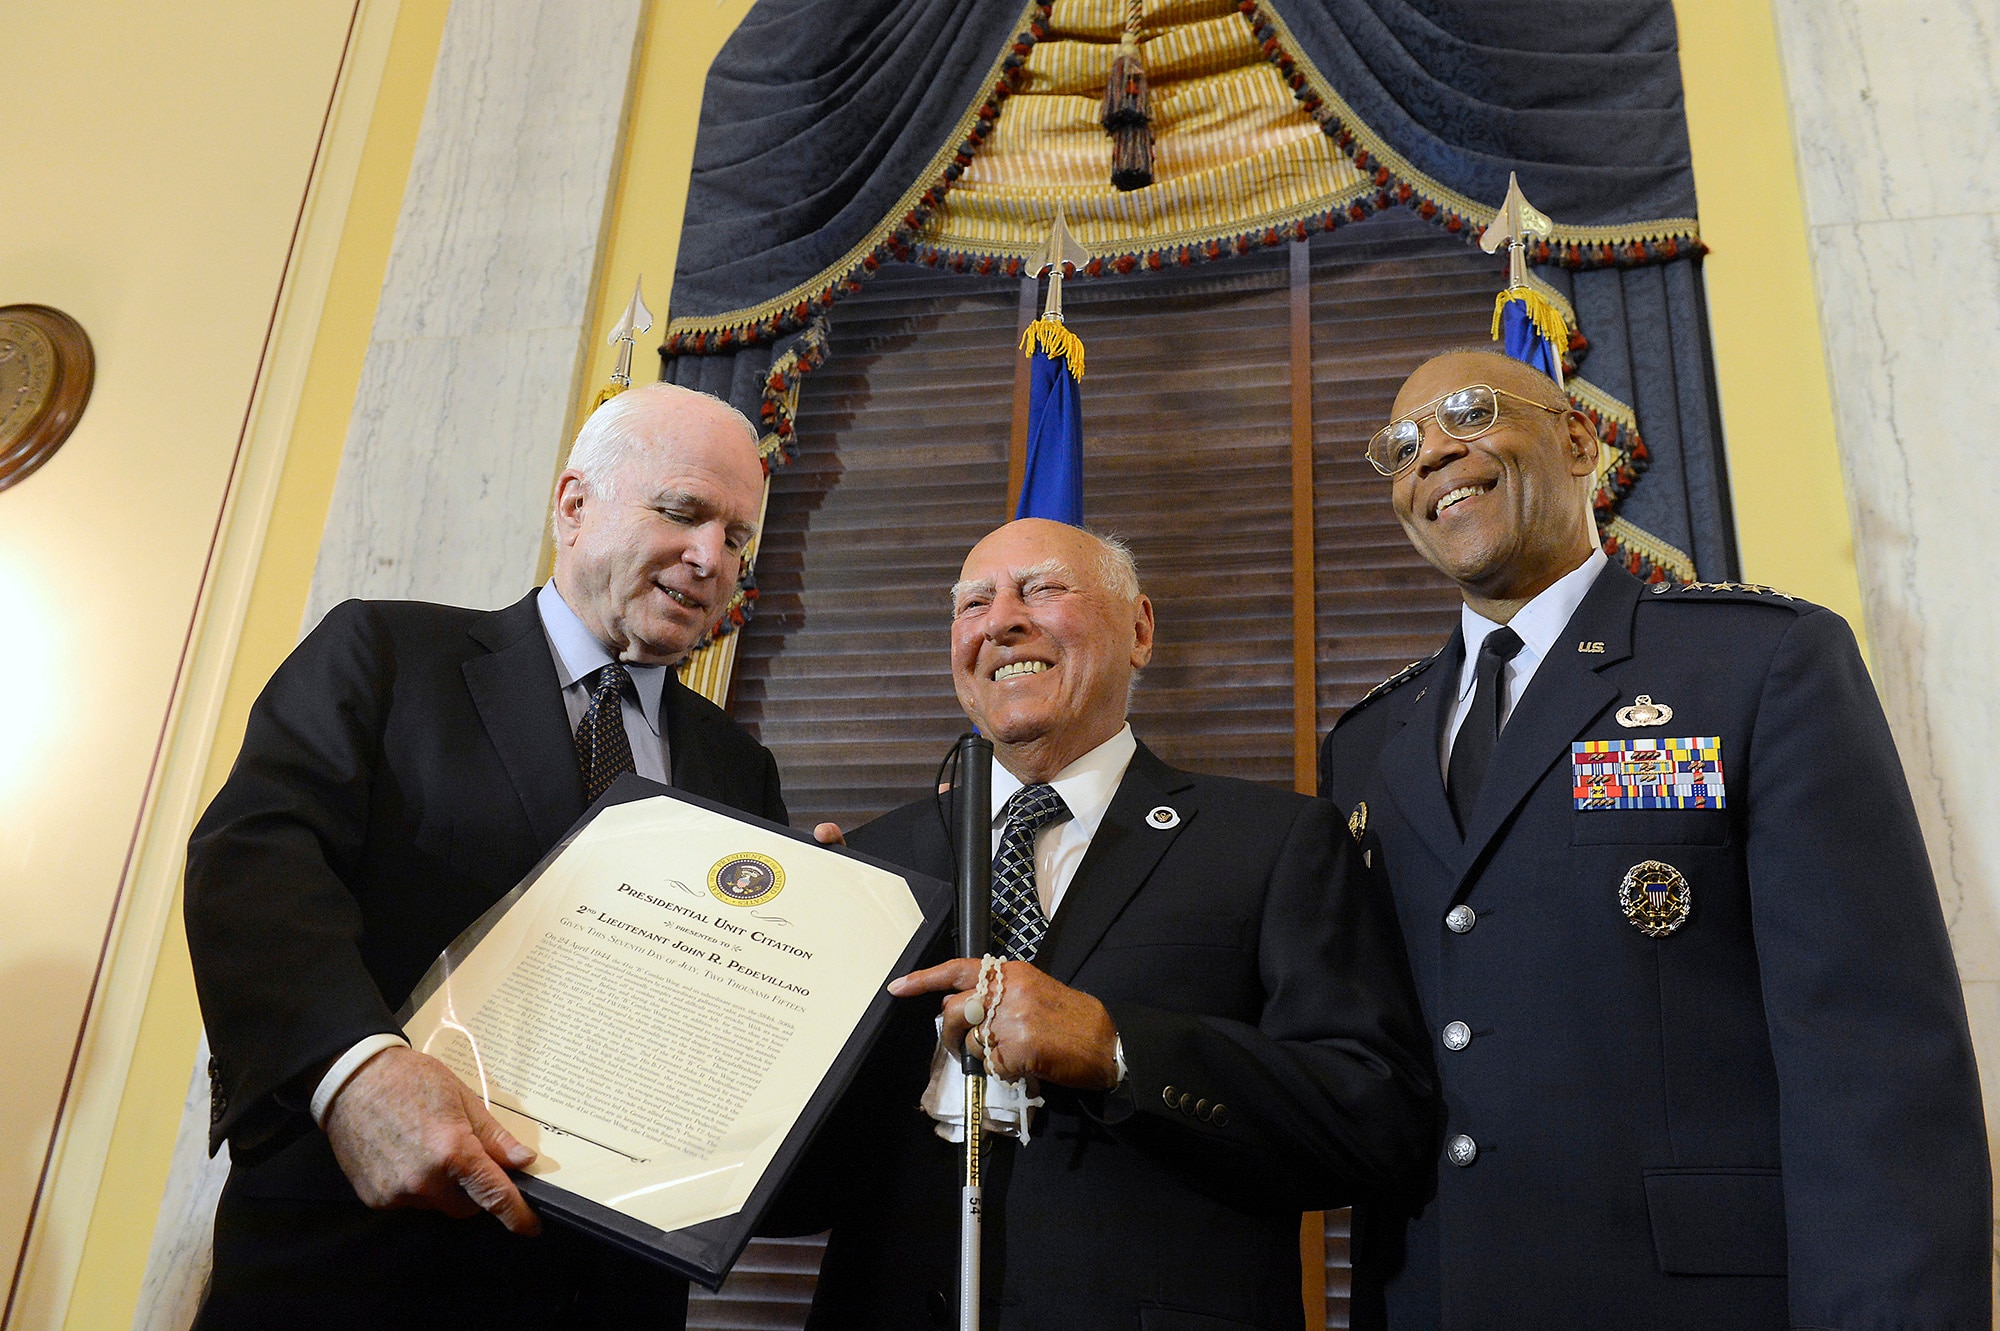 Sen. John McCain and Air Force Vice Chief of Staff Gen. Larry O. Spencer congratulate 2nd Lt. John Pedevillano, a WWII Army Air Corps B-17 bombardier, during a ceremony in his honor, in Washington, D.C., July 7, 2015. McCain and Spencer presented Pedevillano with the Presidential Unit Citation with one oak leaf cluster. He is the last survivor of his WWII unit. (U.S. Air Force photo/Scott M. Ash)